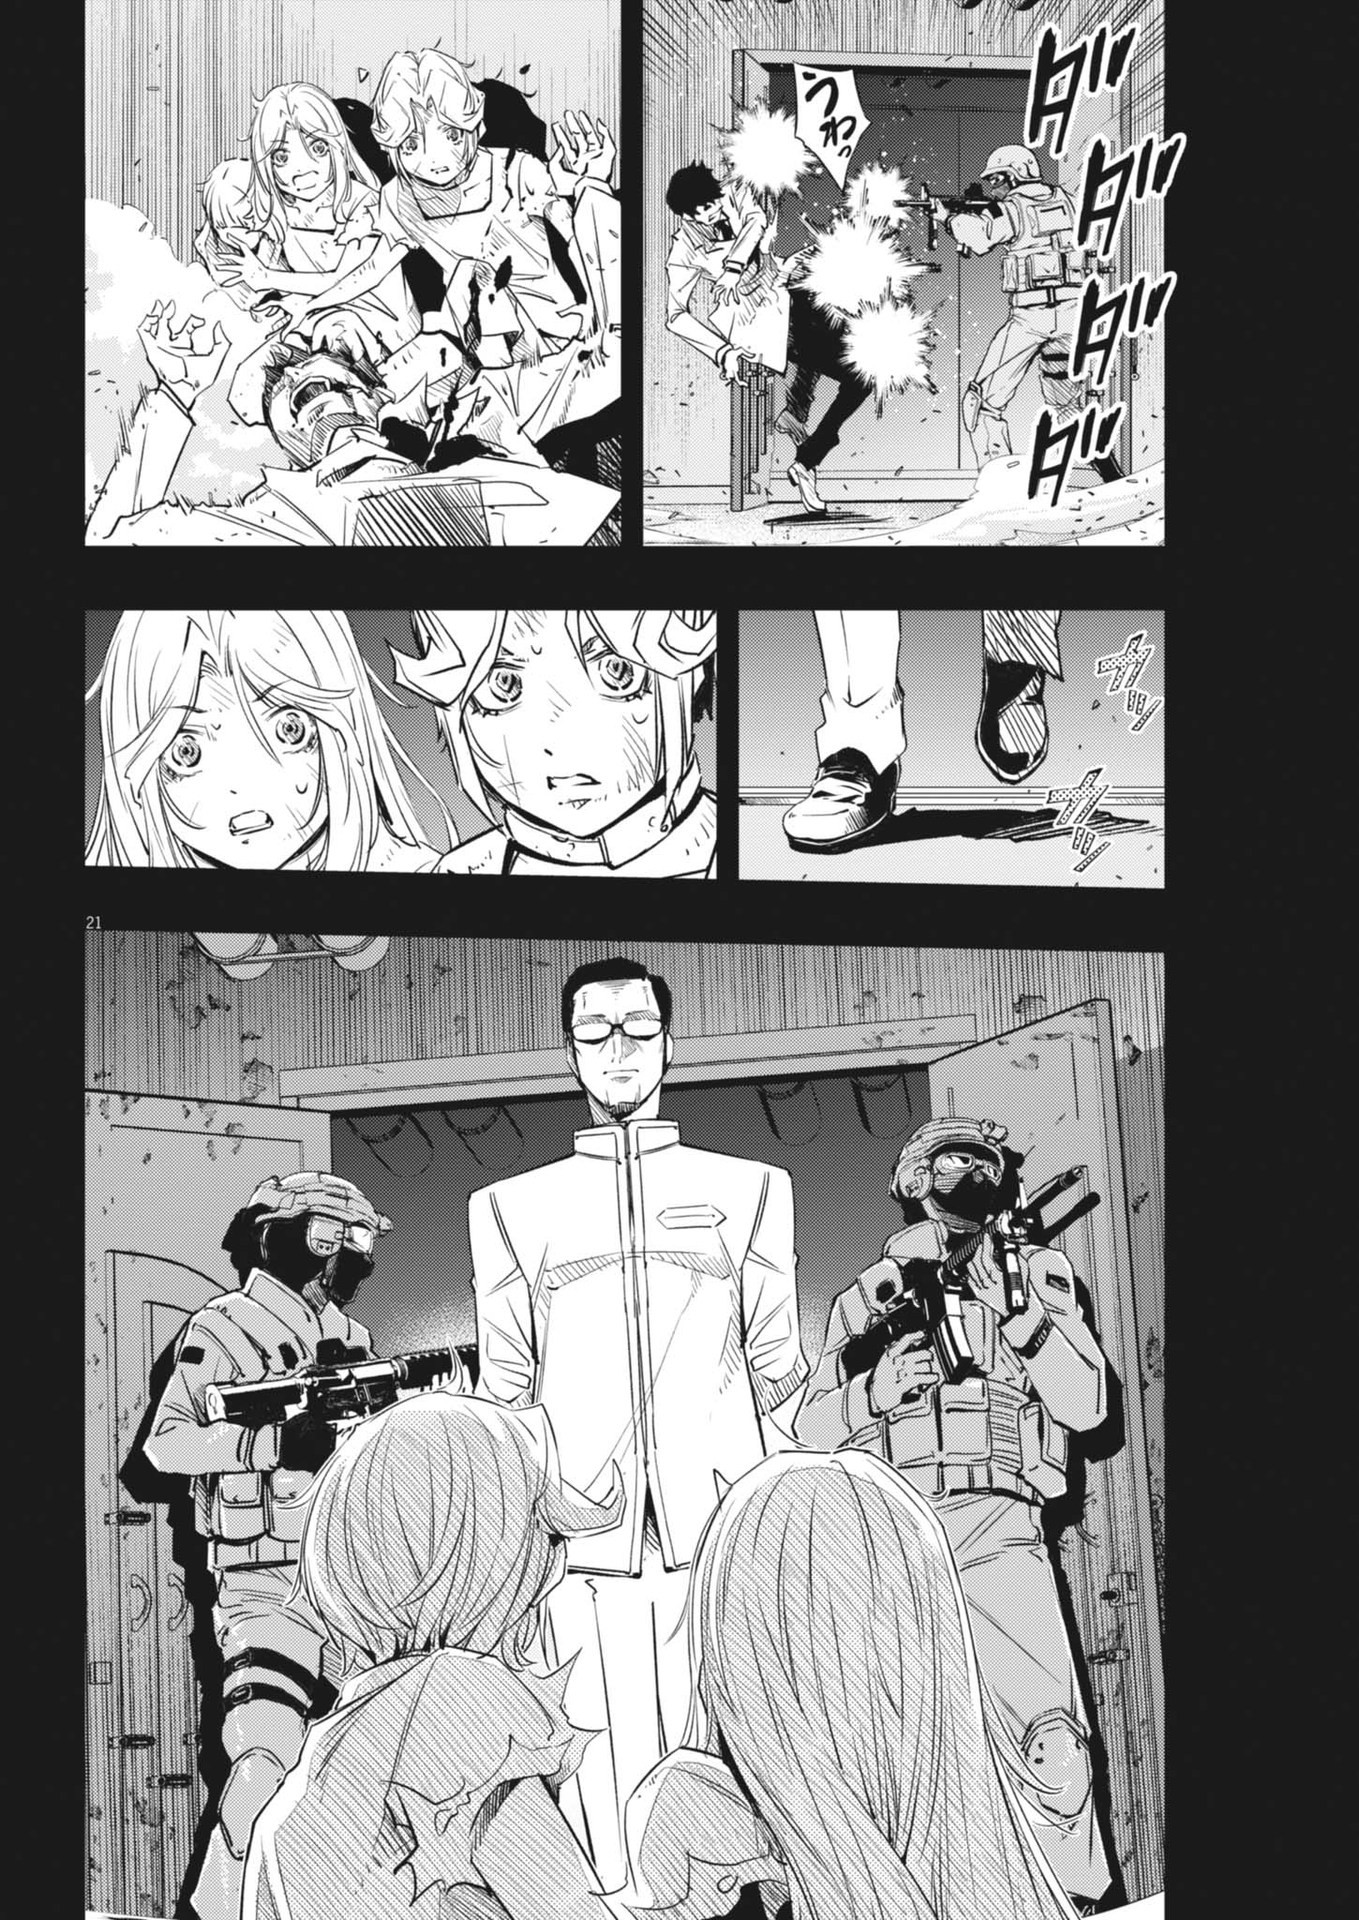 Kamen Rider W: Fuuto Tantei - Chapter 144 - Page 21